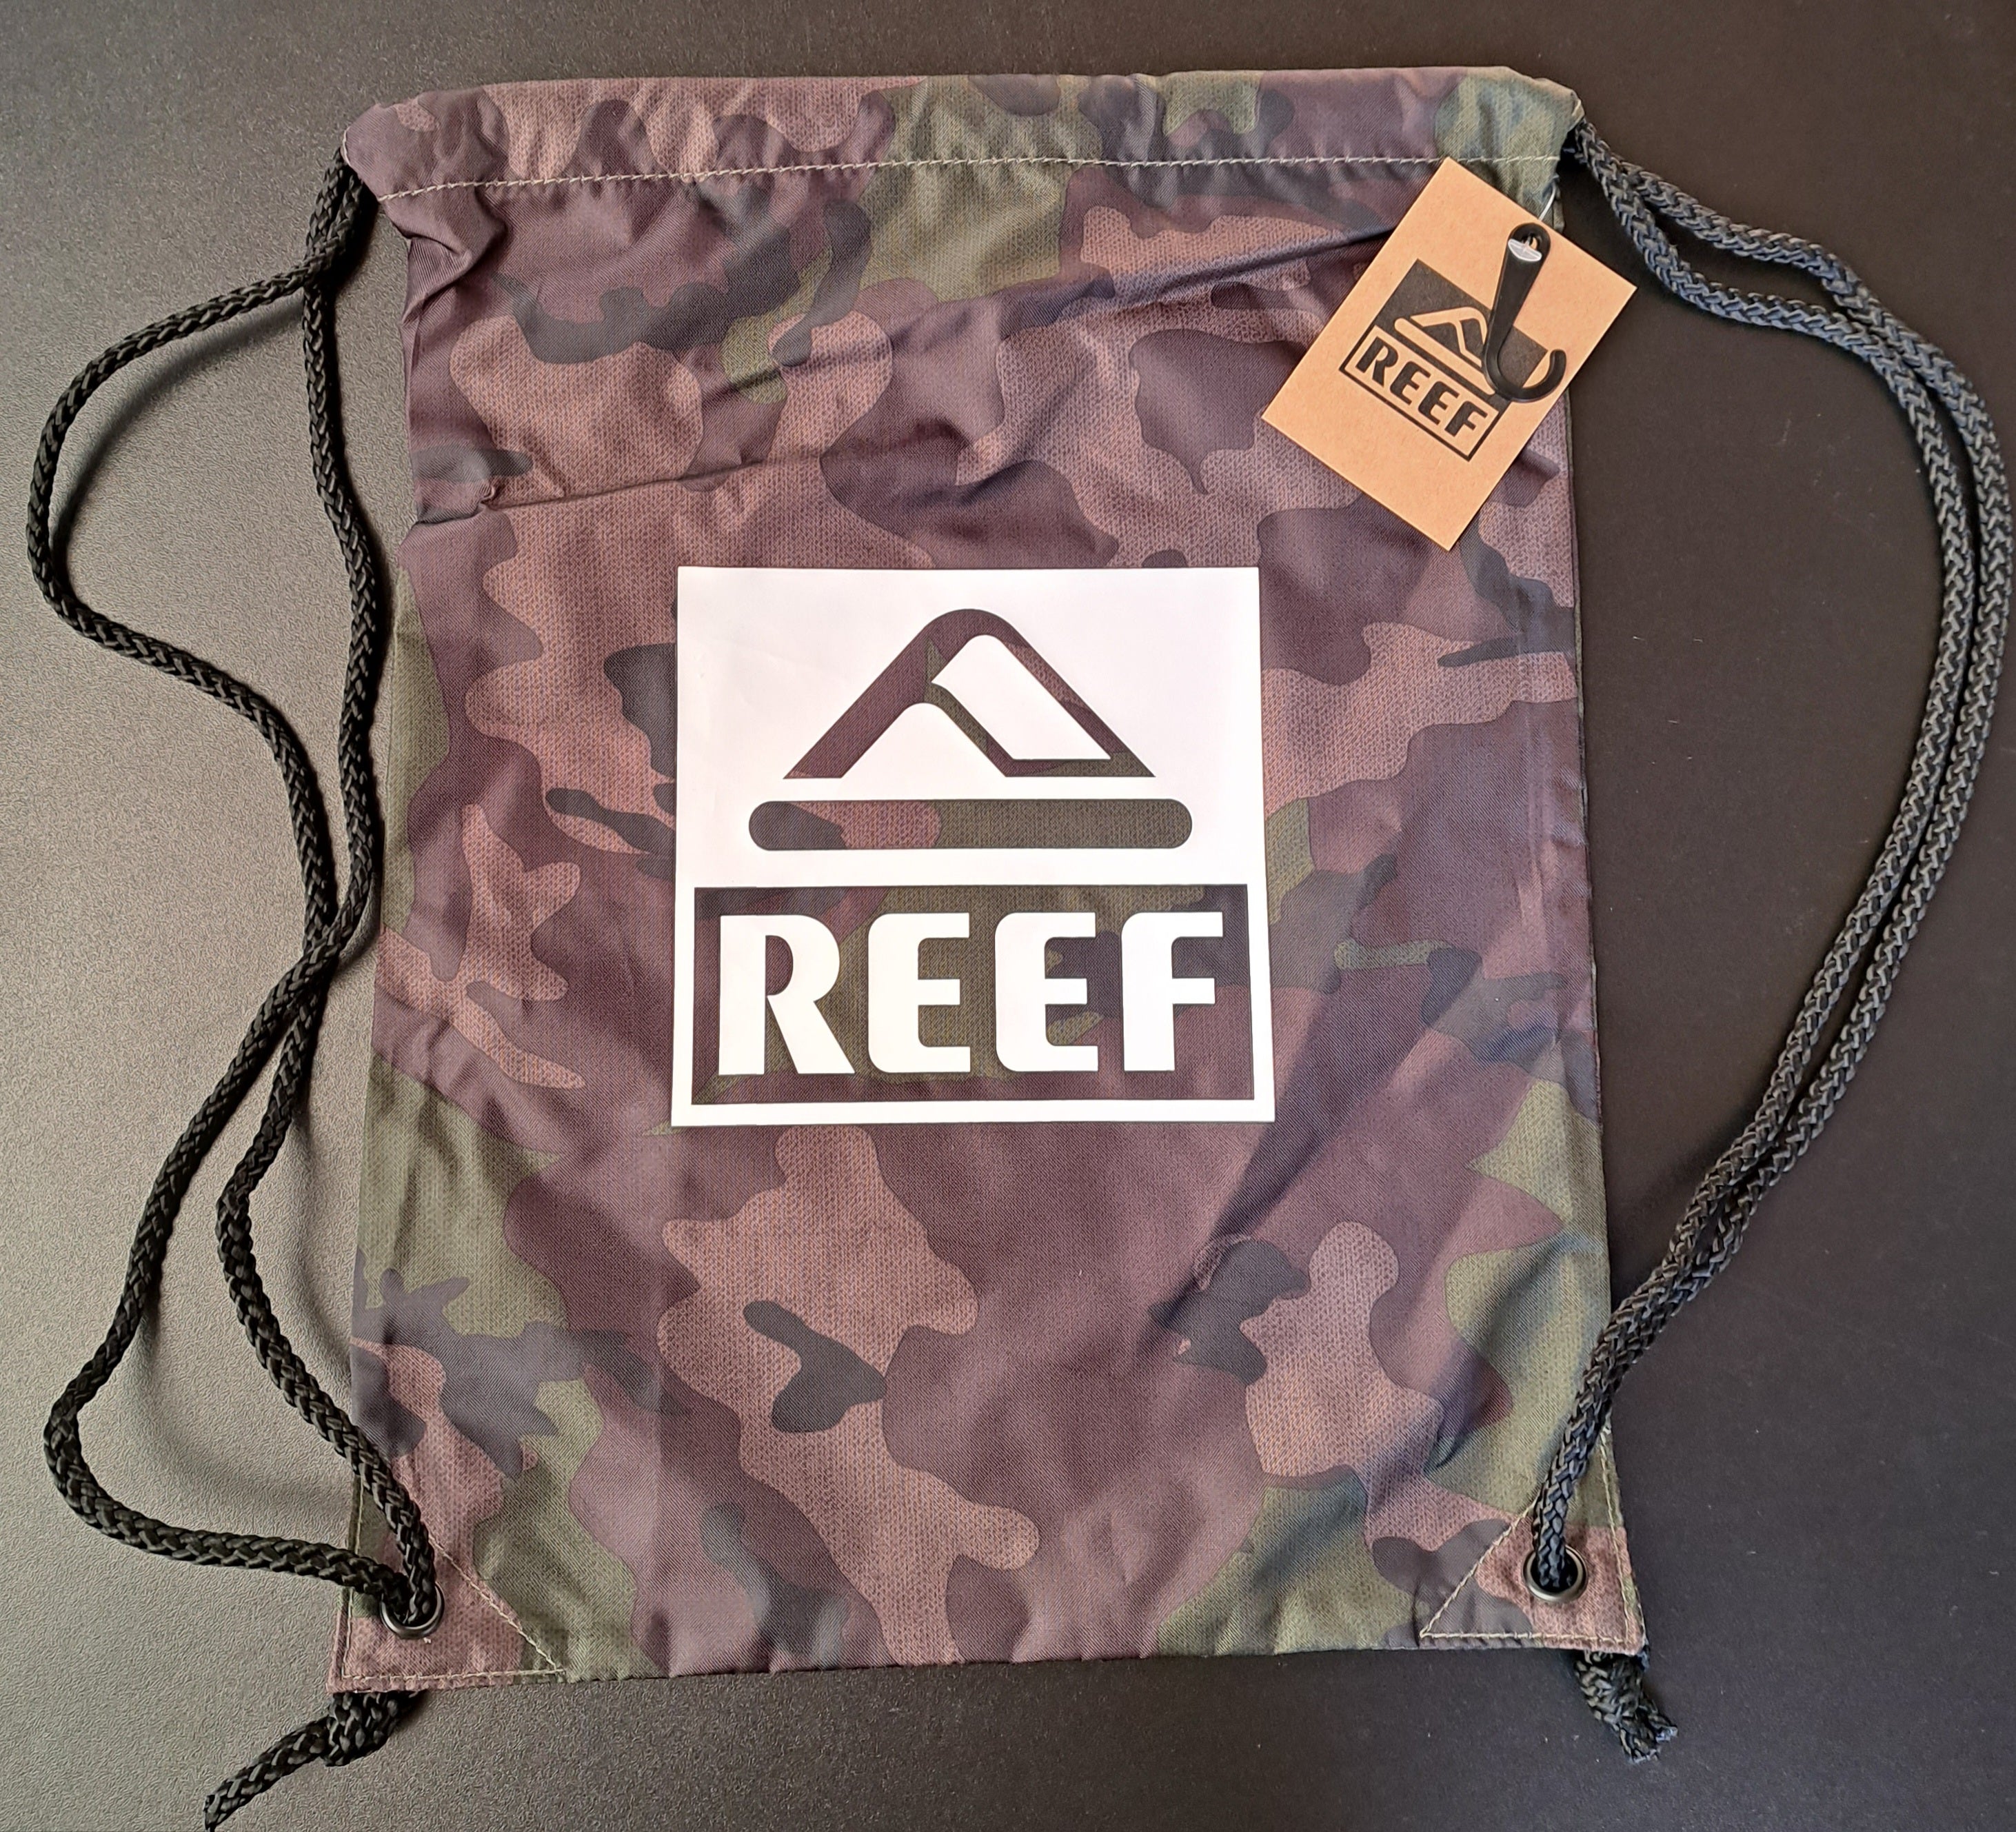 Reef Beach Bag, one Size, camouflage